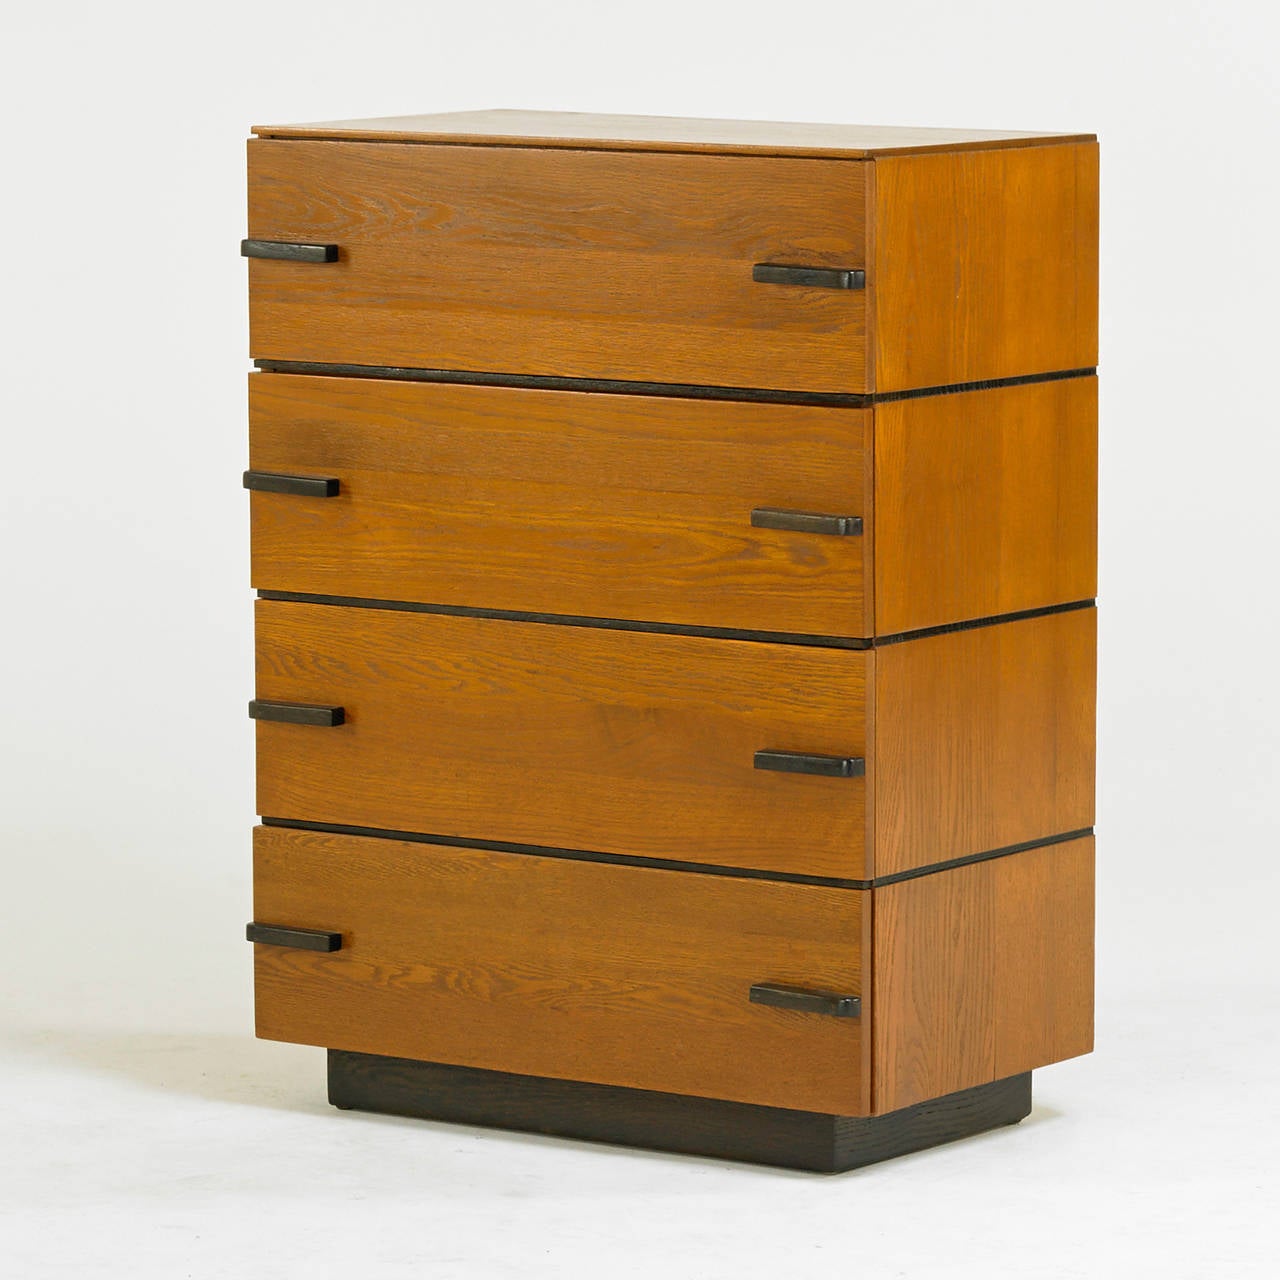 A four-drawer chest designed by Gilbert Rohde and manufactured by Kroehler. Oak with ebonized oak detail, foil label, USA, 1930s. Excellent condition.